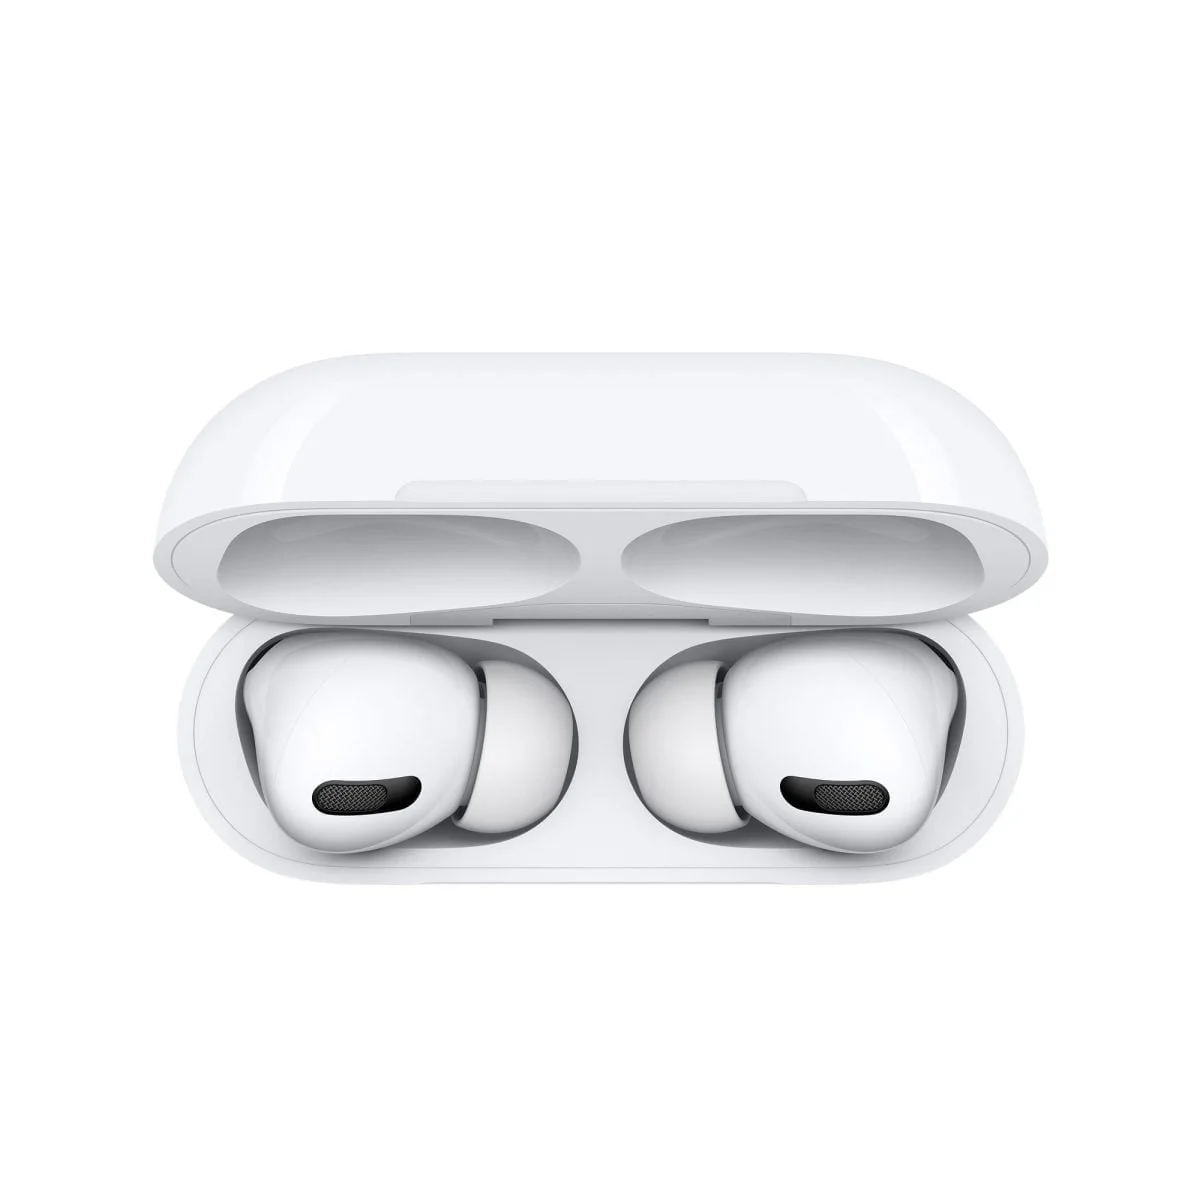 Airpods Pro Apple &Lt;Div Class=&Quot;Rc-Pdsection-Sidepanel Column Large-3 Small-12&Quot;&Gt; &Lt;H1&Gt;Apple Airpods Pro (With Magsafe Charging Case) - White&Lt;/H1&Gt; &Lt;/Div&Gt; &Lt;Div Class=&Quot;Rc-Pdsection-Mainpanel Column Large-9 Small-12&Quot;&Gt; &Lt;H4 Class=&Quot;H4-Para-Title&Quot;&Gt;Magic Like You’ve Never Heard&Lt;/H4&Gt; &Lt;Div Class=&Quot;Para-List As-Pdp-Lastparalist&Quot;&Gt; Airpods Pro Have Been Designed To Deliver Active Noise Cancellation For Immersive Sound, Transparency Mode So You Can Hear Your Surroundings, And A Customizable Fit For All-Day Comfort. Just Like Airpods, Airpods Pro Connect Magically To Your Apple Devices. And They’re Ready To Use Right Out Of The Case. &Lt;/Div&Gt; &Lt;/Div&Gt; Airpods Pro Apple Airpods Pro (With Magsafe Charging Case) - White Mlwk3